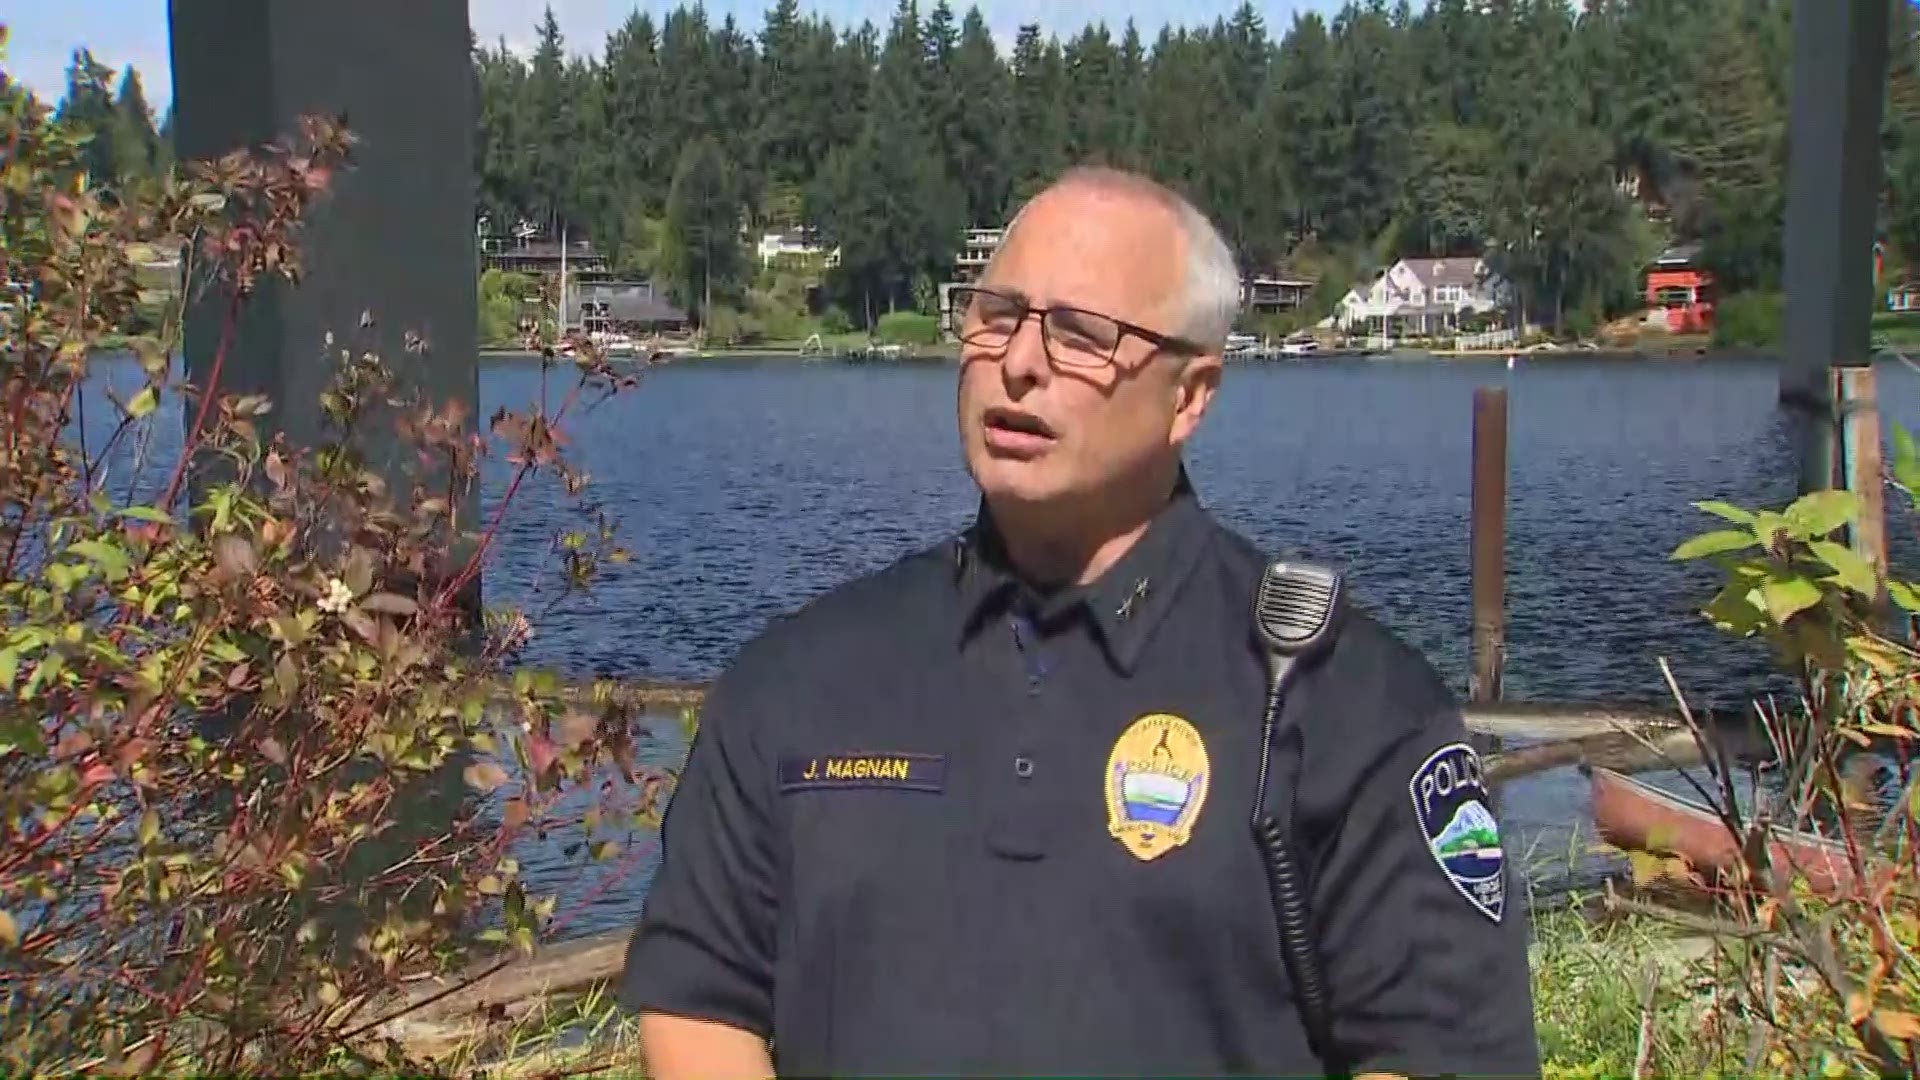 Police and rescue crews are looking for a man and a woman who went missing from a boat in Lake Washington.